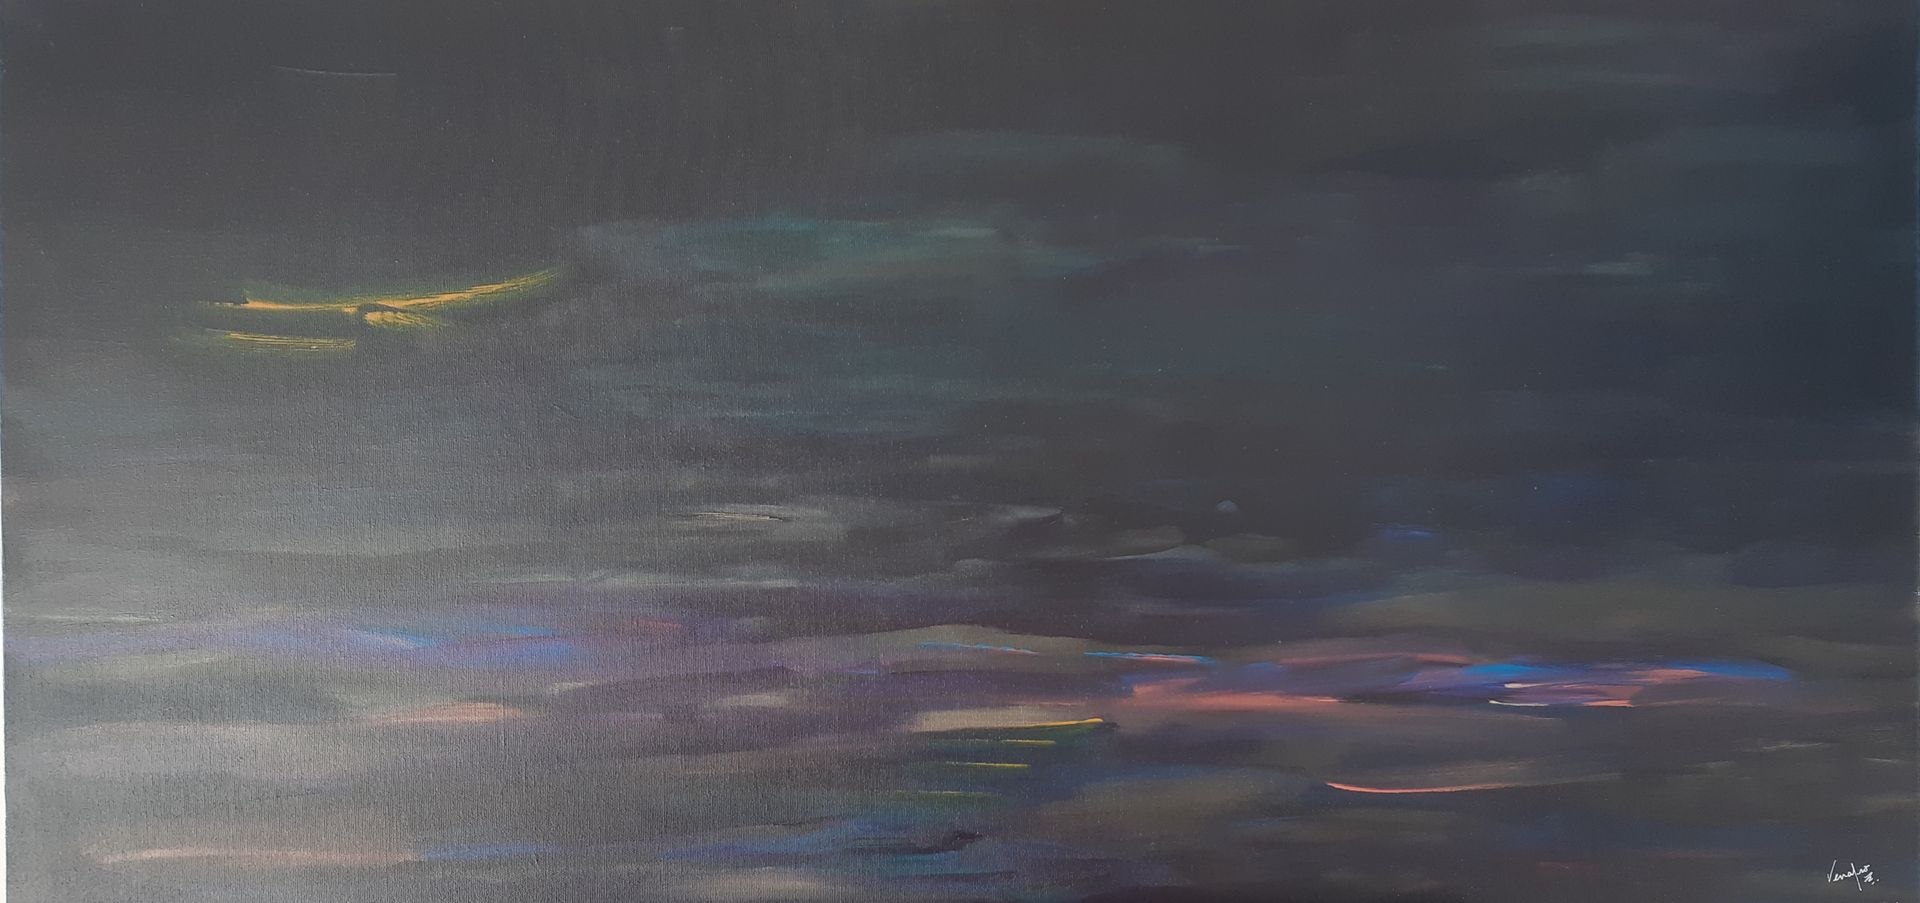 Silk Sky: Acrylic on Canvas 40 in. x 20 in. Blends of Iridescence (yellow, green, pearl white, red) and interference colours all on a Black gesso canvas. My goal was to extract light from the darkness of the black gesso.